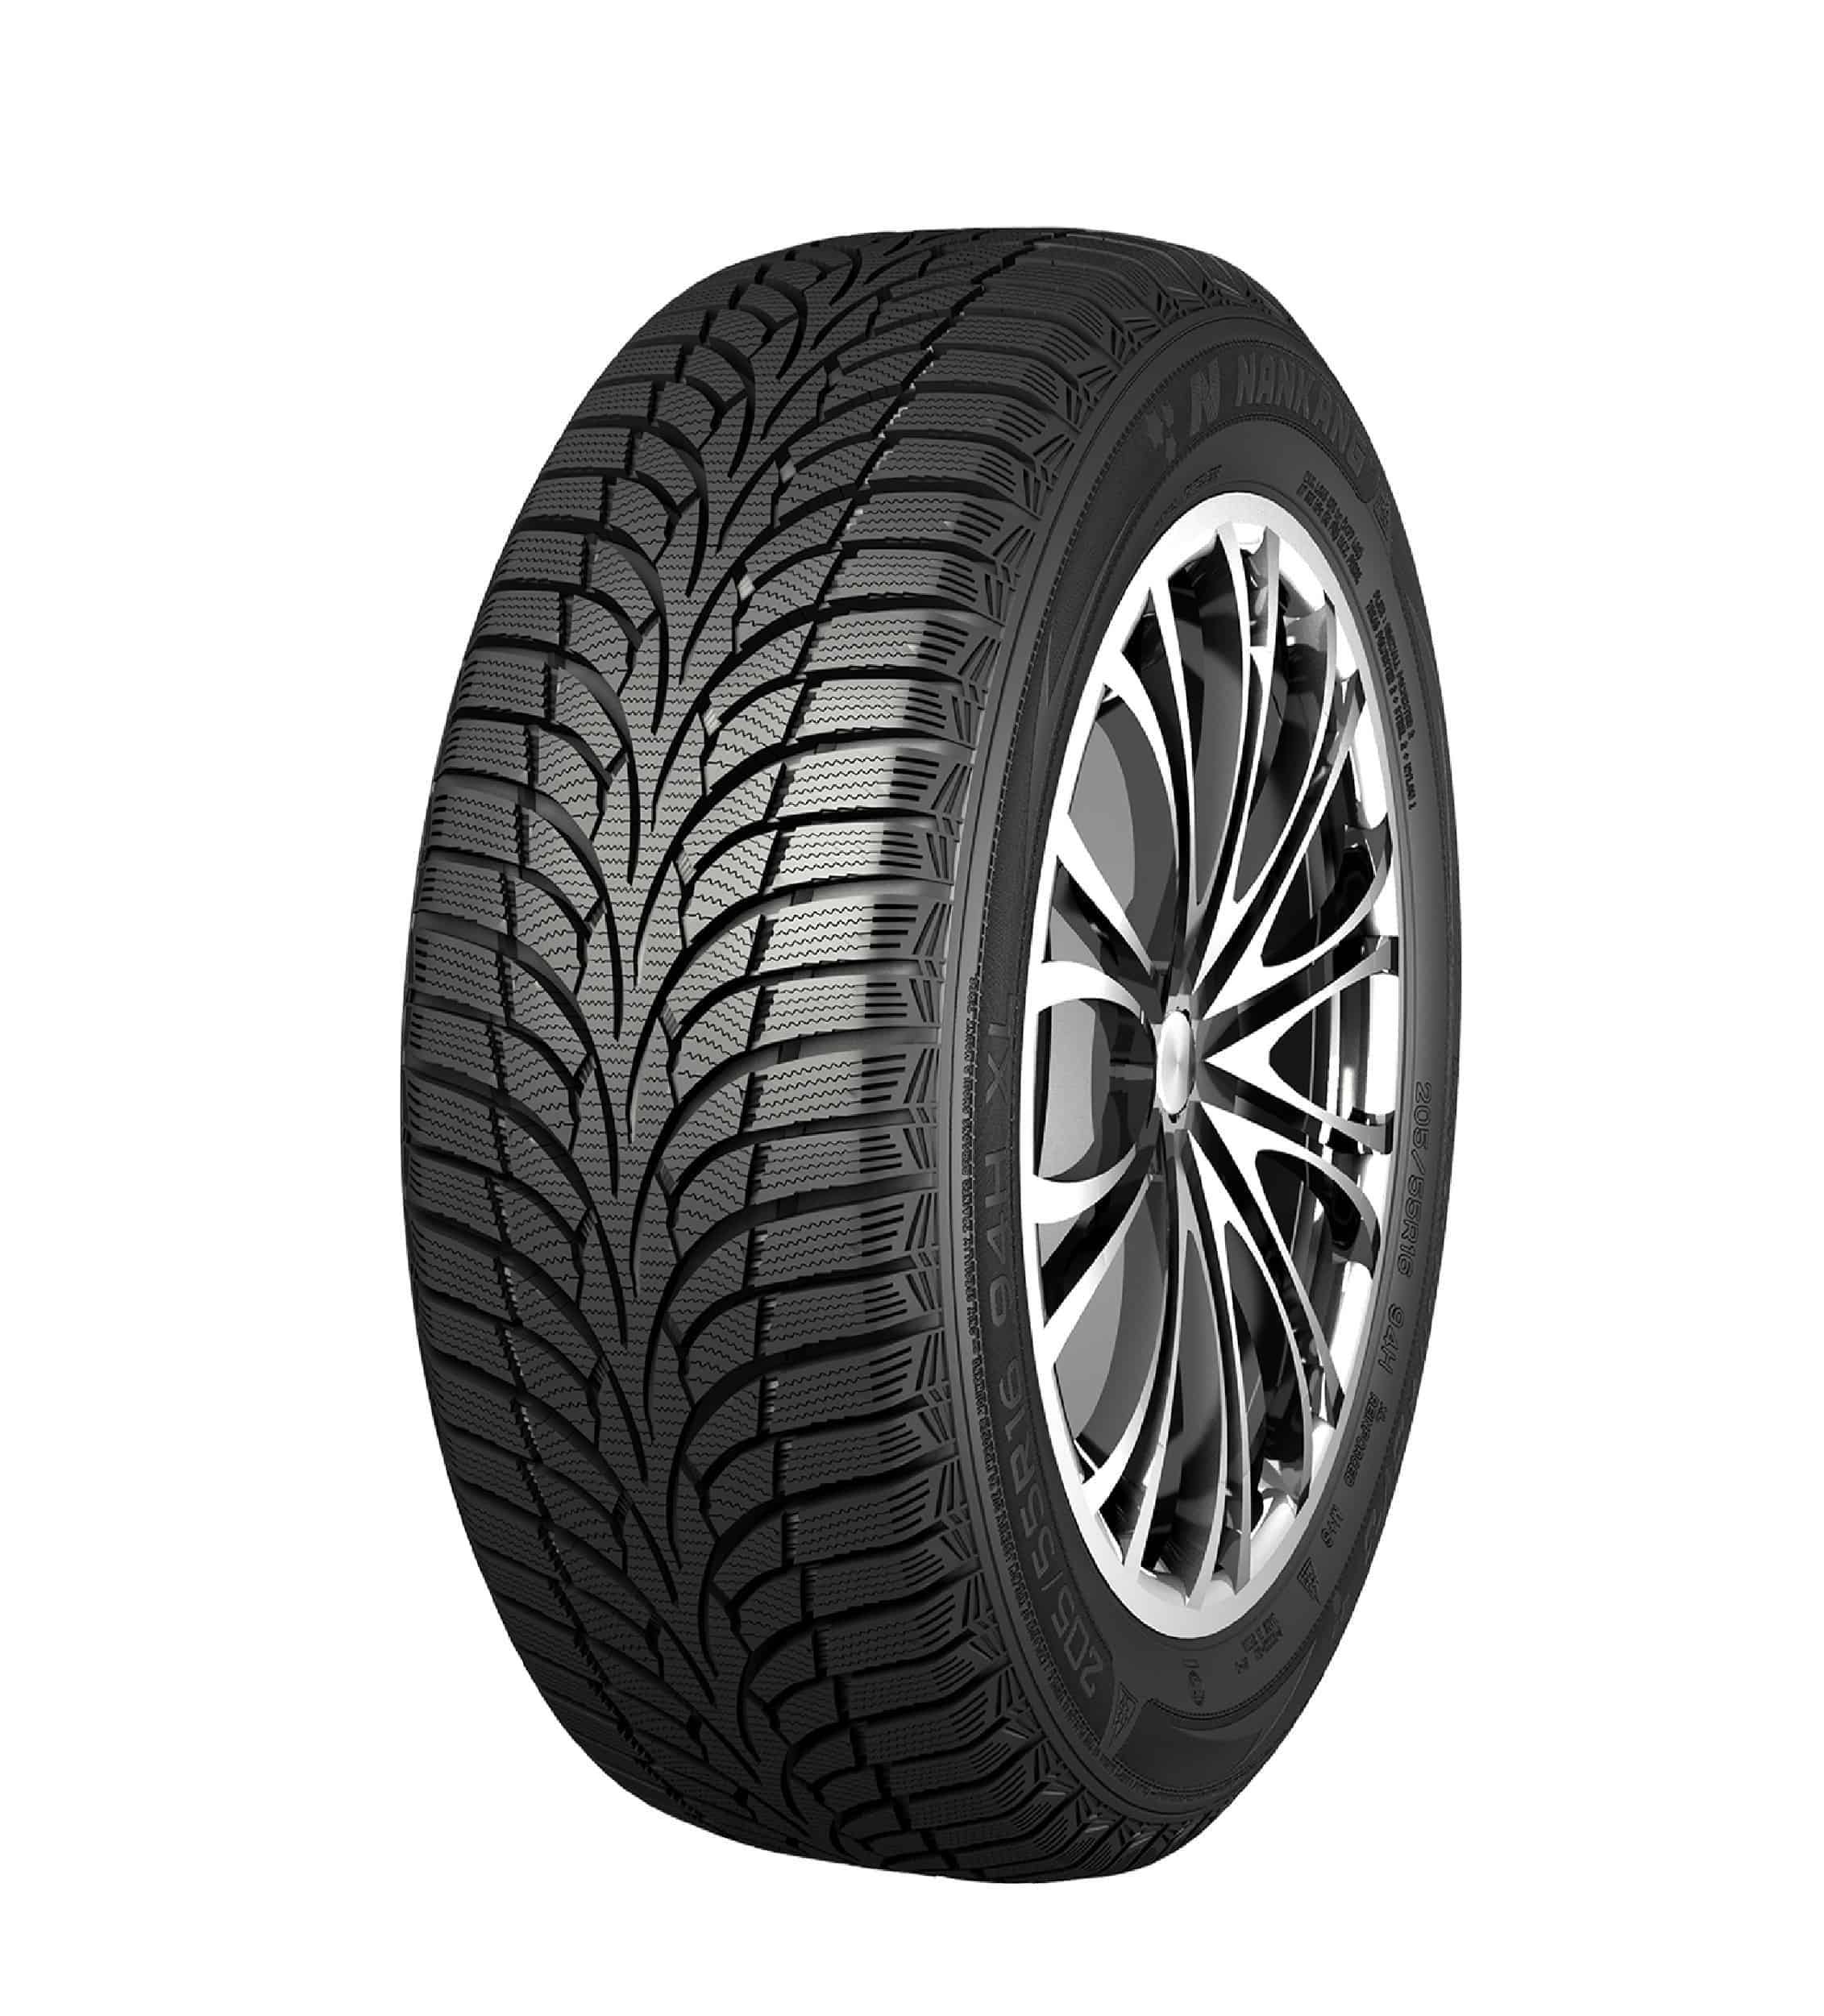 Gomme Nuove Nankang 205/55 R16 94H Winter Activa SV-3 XL M+S pneumatici nuovi Invernale